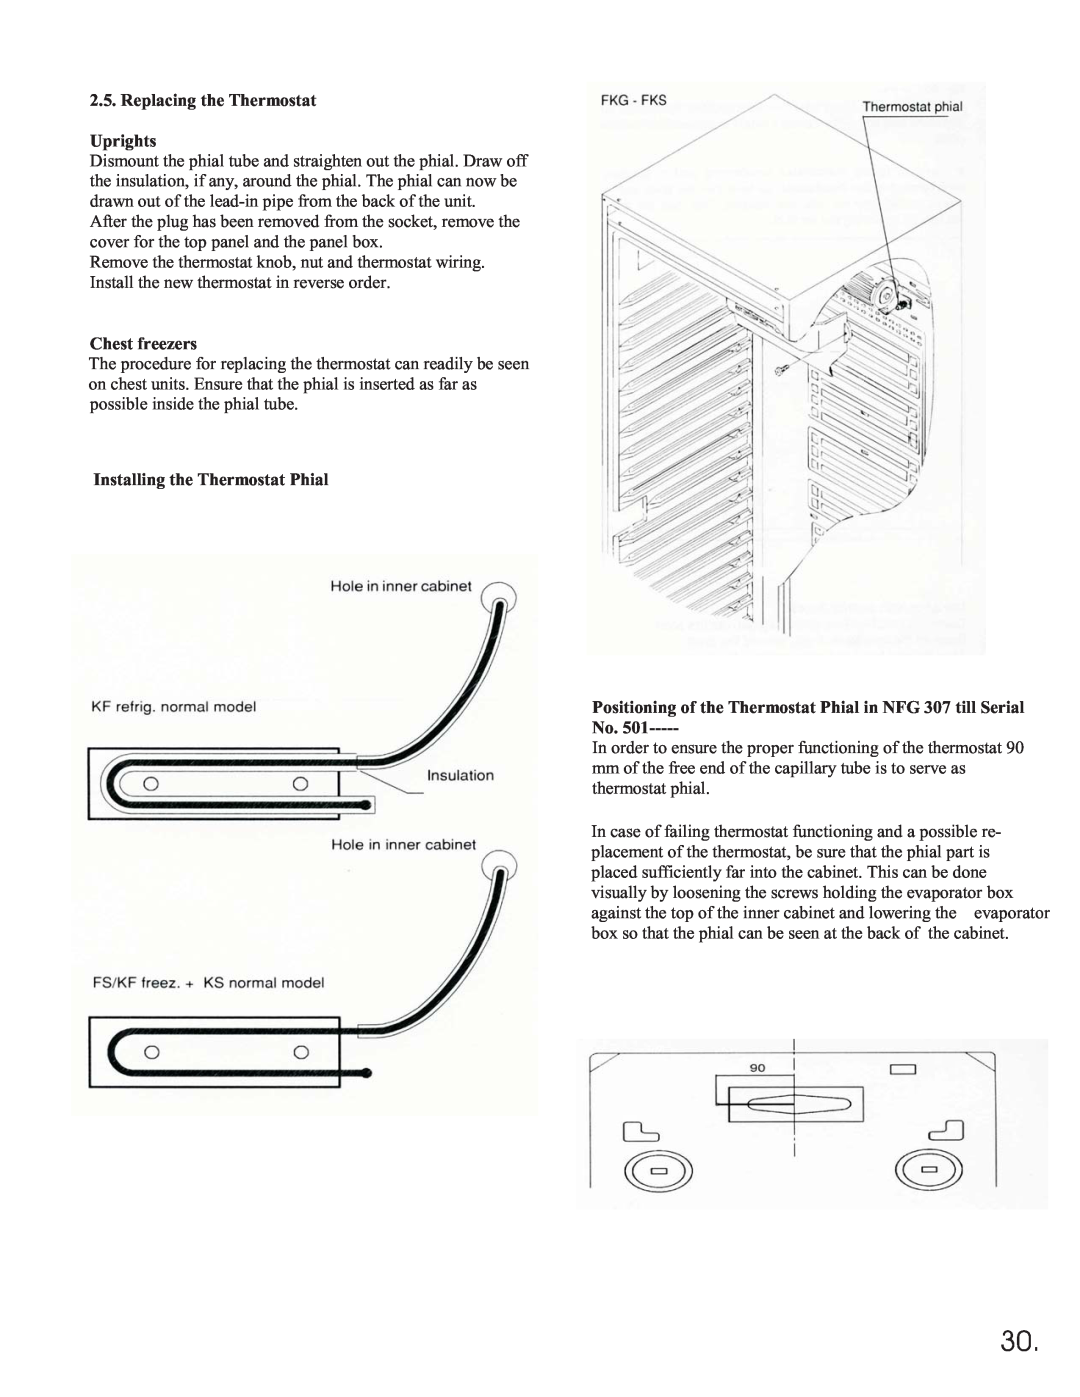 Equator 375 service manual Replacing the Thermostat Uprights, Chest freezers, Installing the Thermostat Phial 